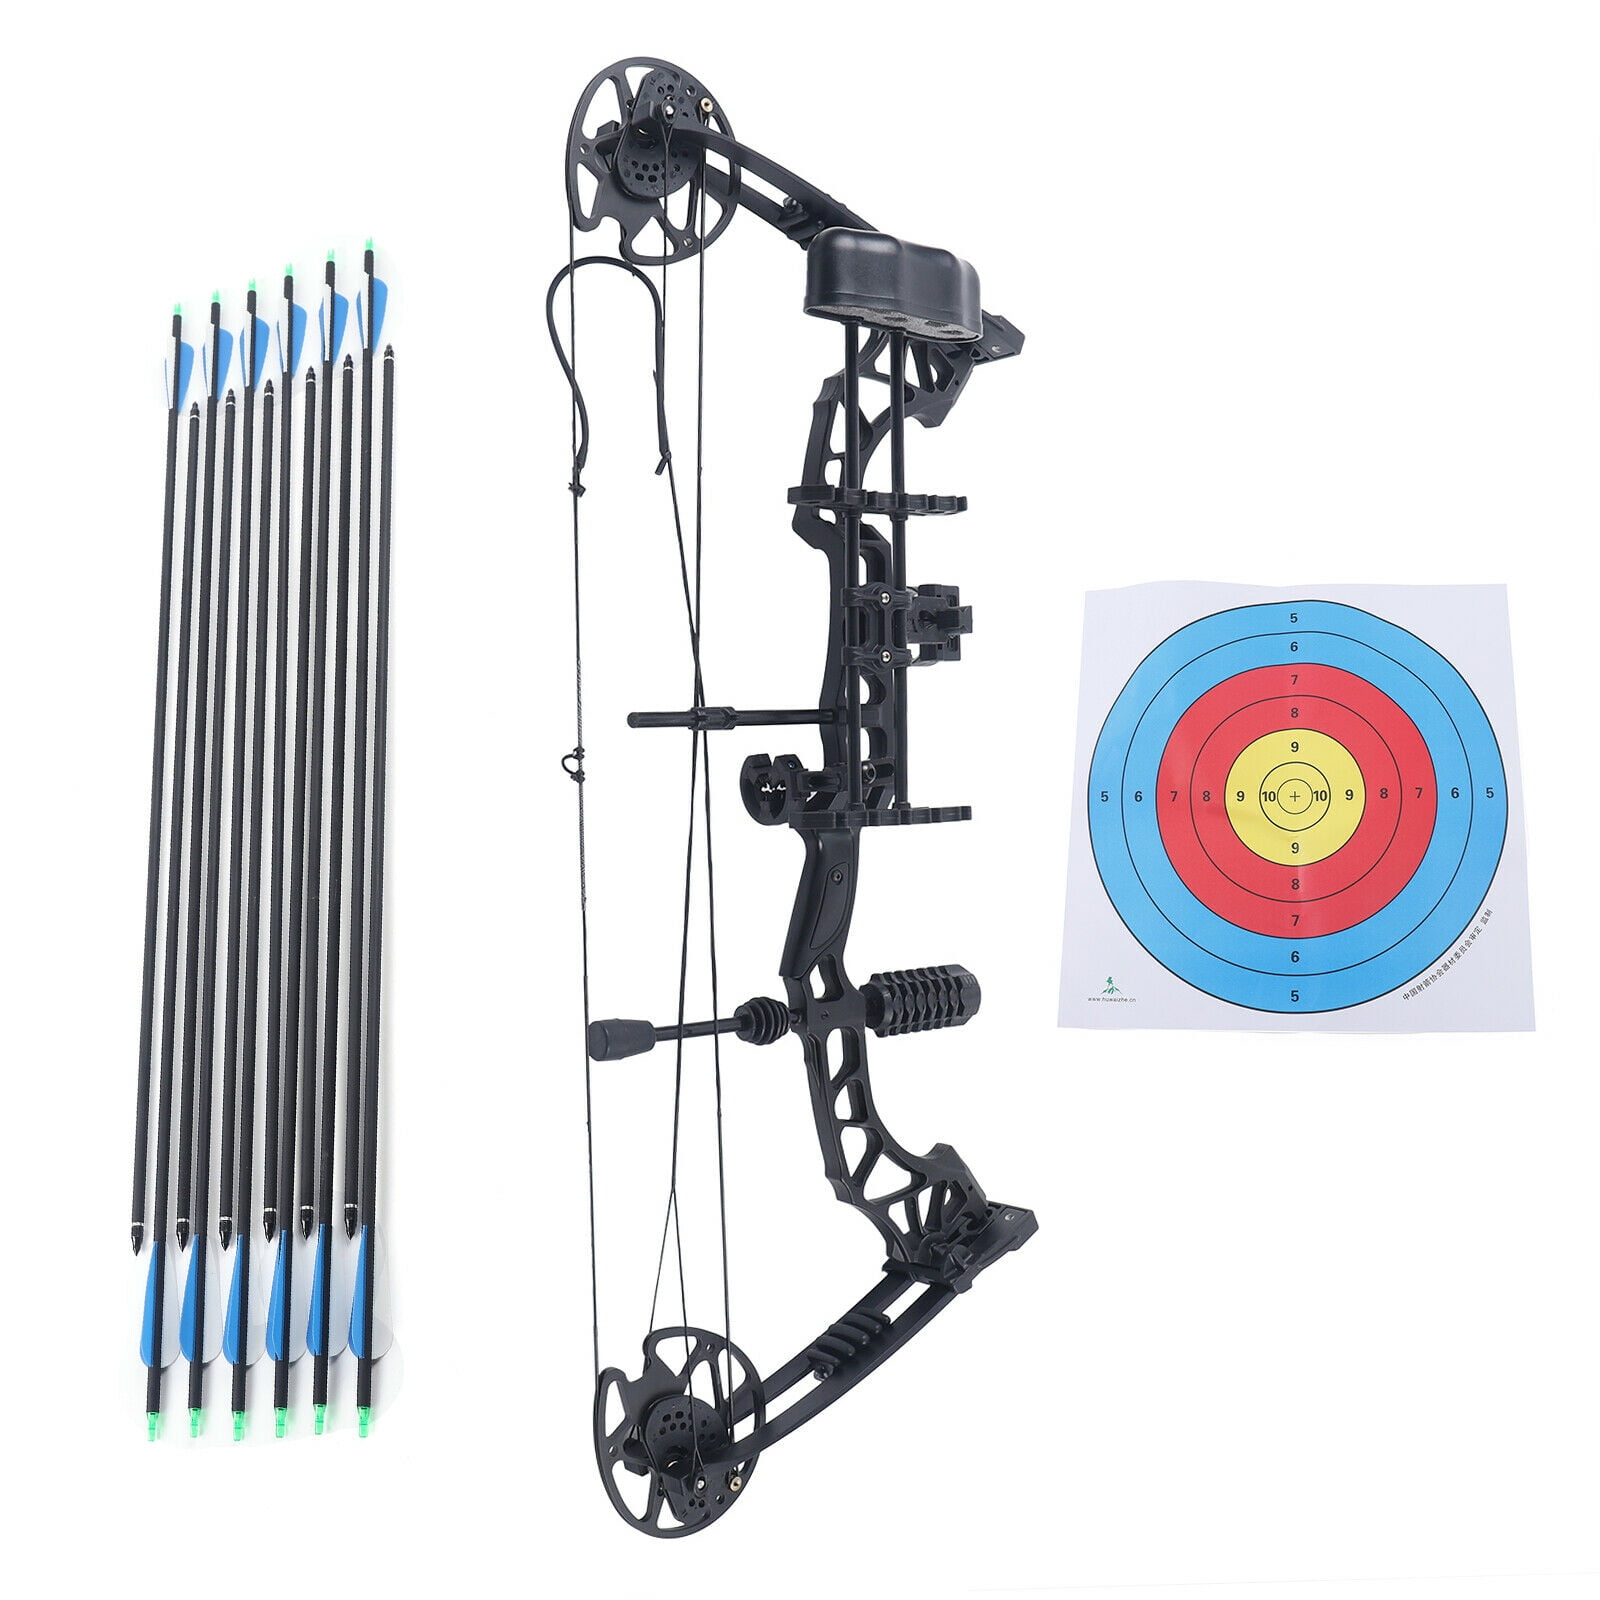 Right Hand Compound Bow Set Adjustable Draw Length & Weight Shooting Outdoor Hunting Target Archery 